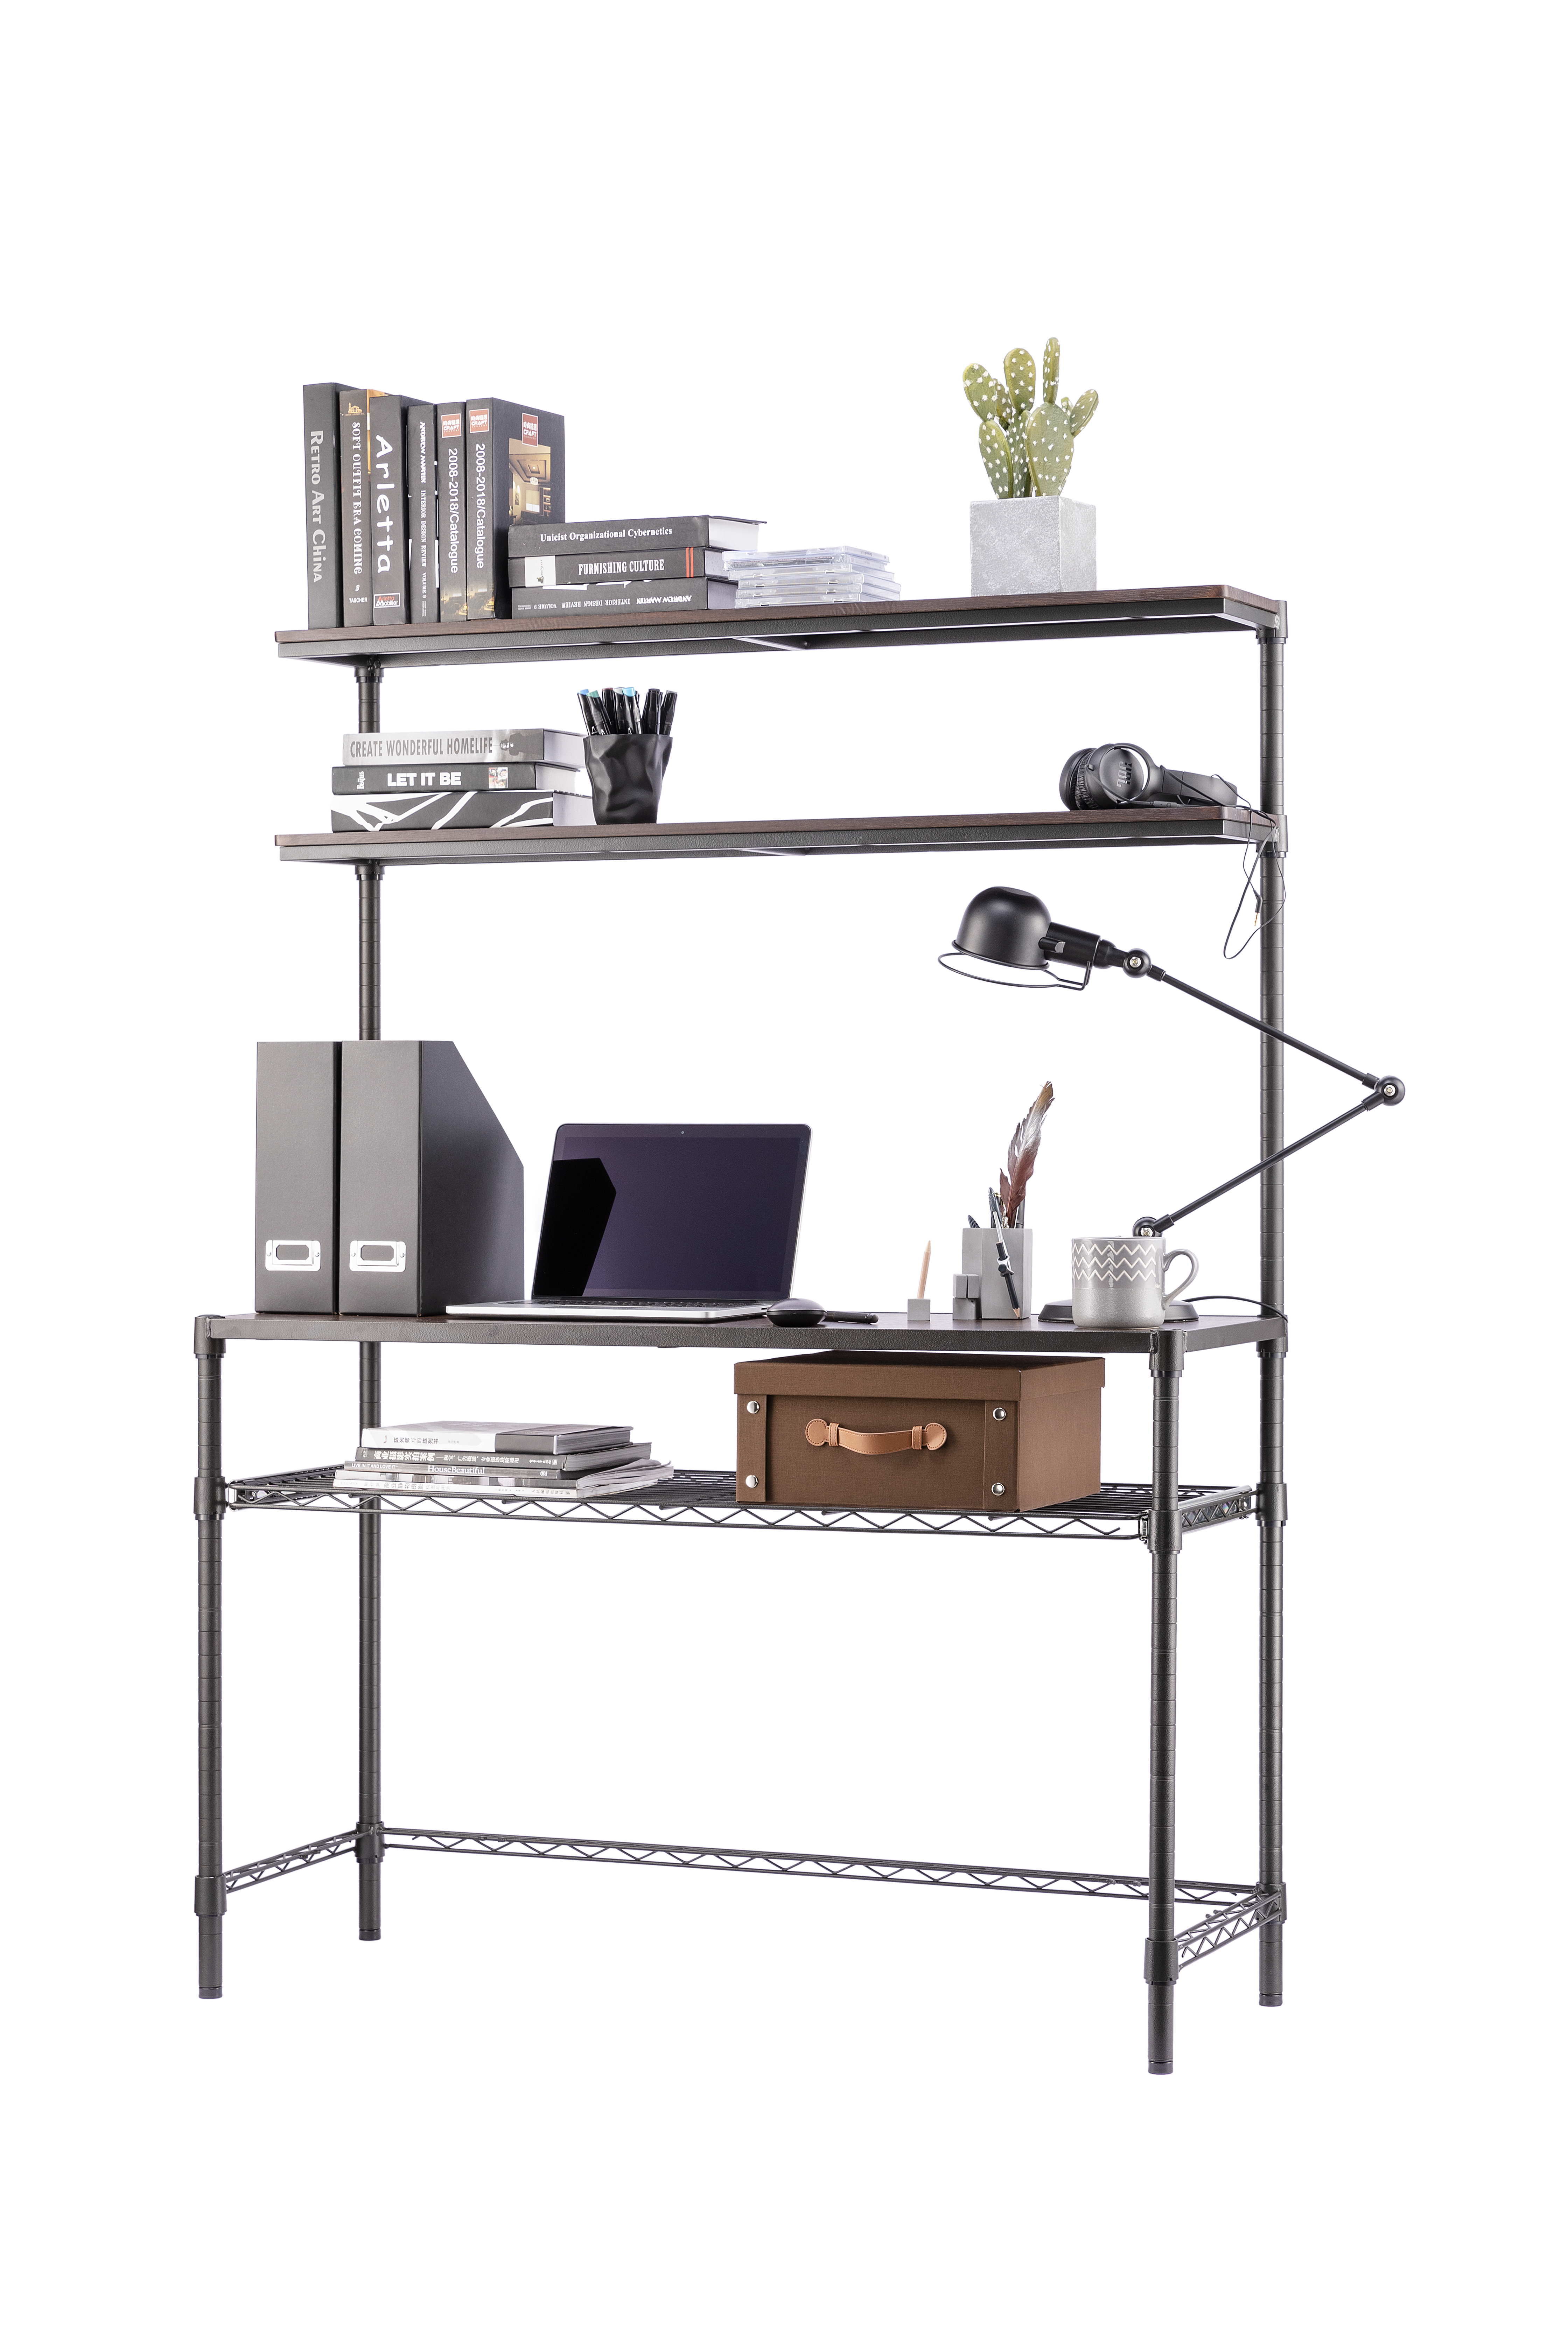 4-Tier Workstation Computer Desk With Wire Storage Shelves / Home Office PC Laptop Table Study Desk 